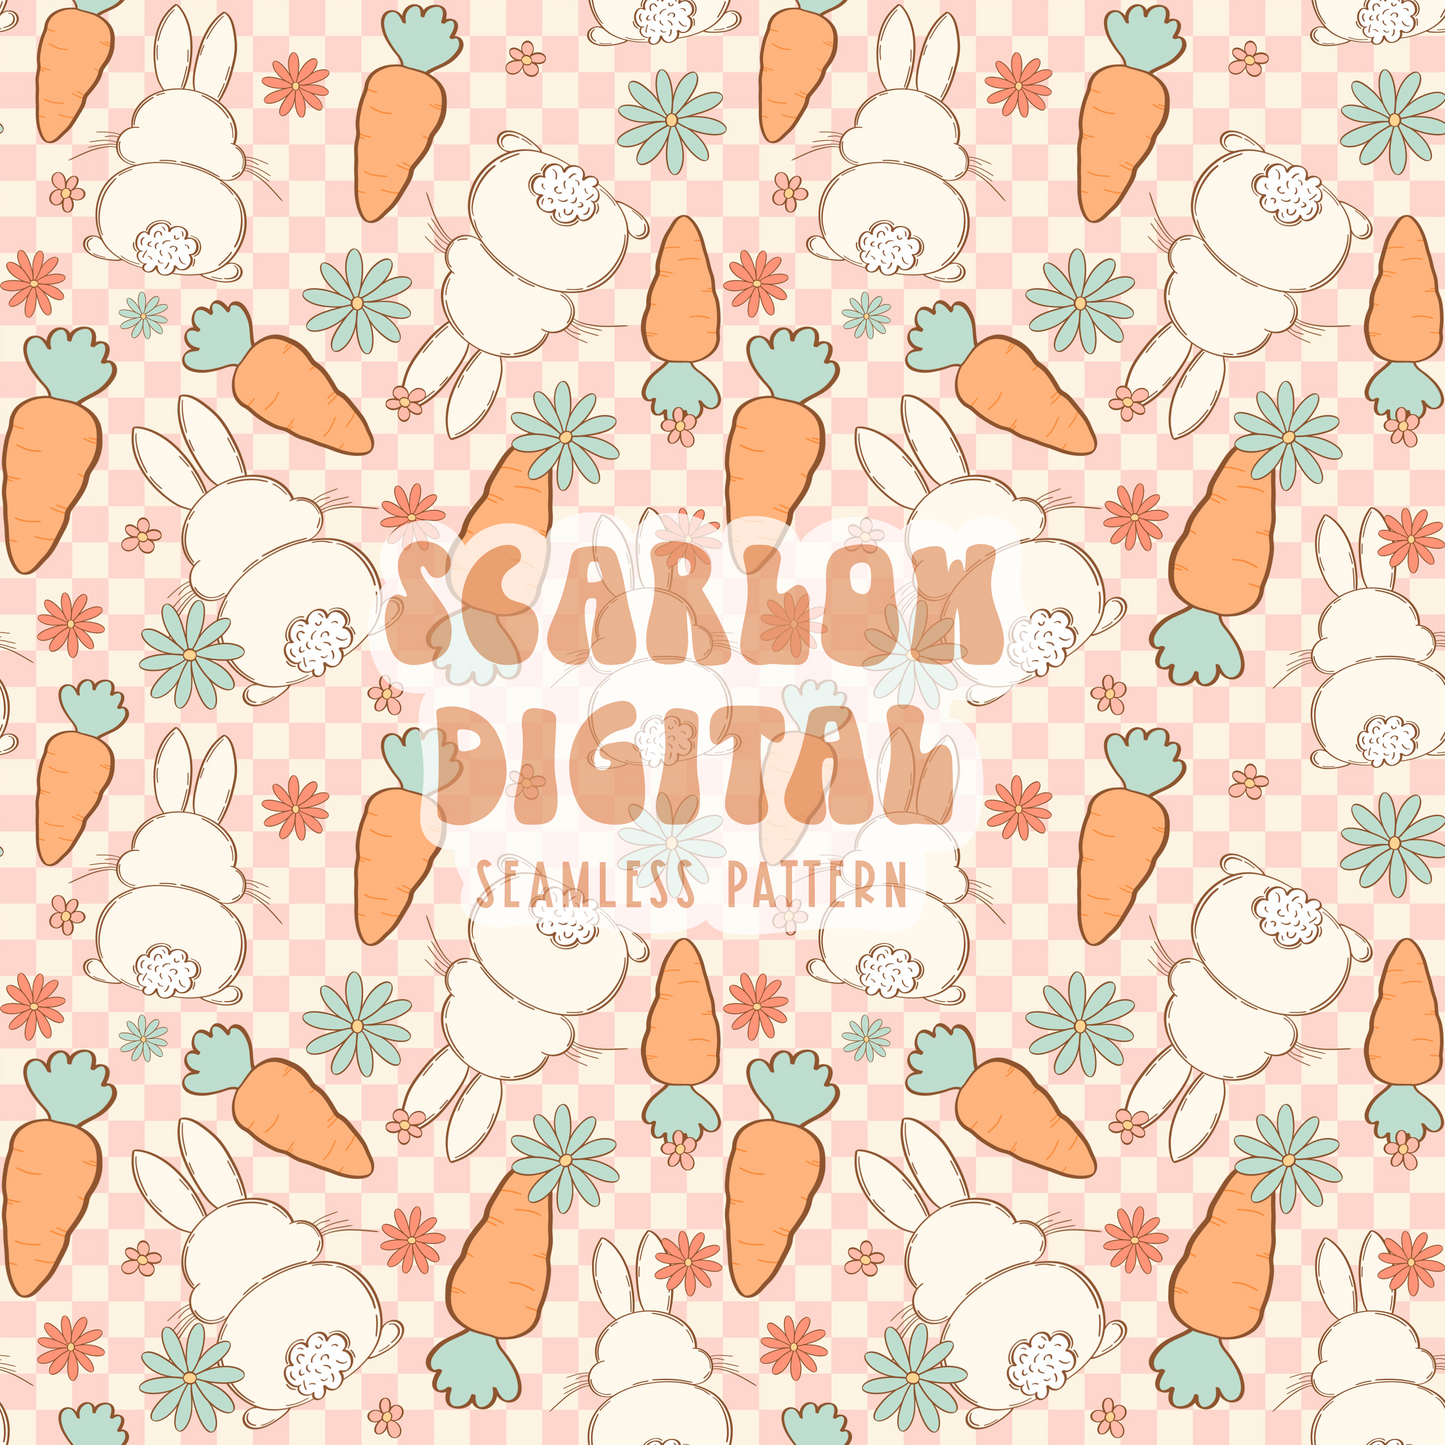 Bunny and Carrots Seamless Pattern-Easter Sublimation Digital Design Download-girl easter seamless file, floral sublimation, bunny babe jpg